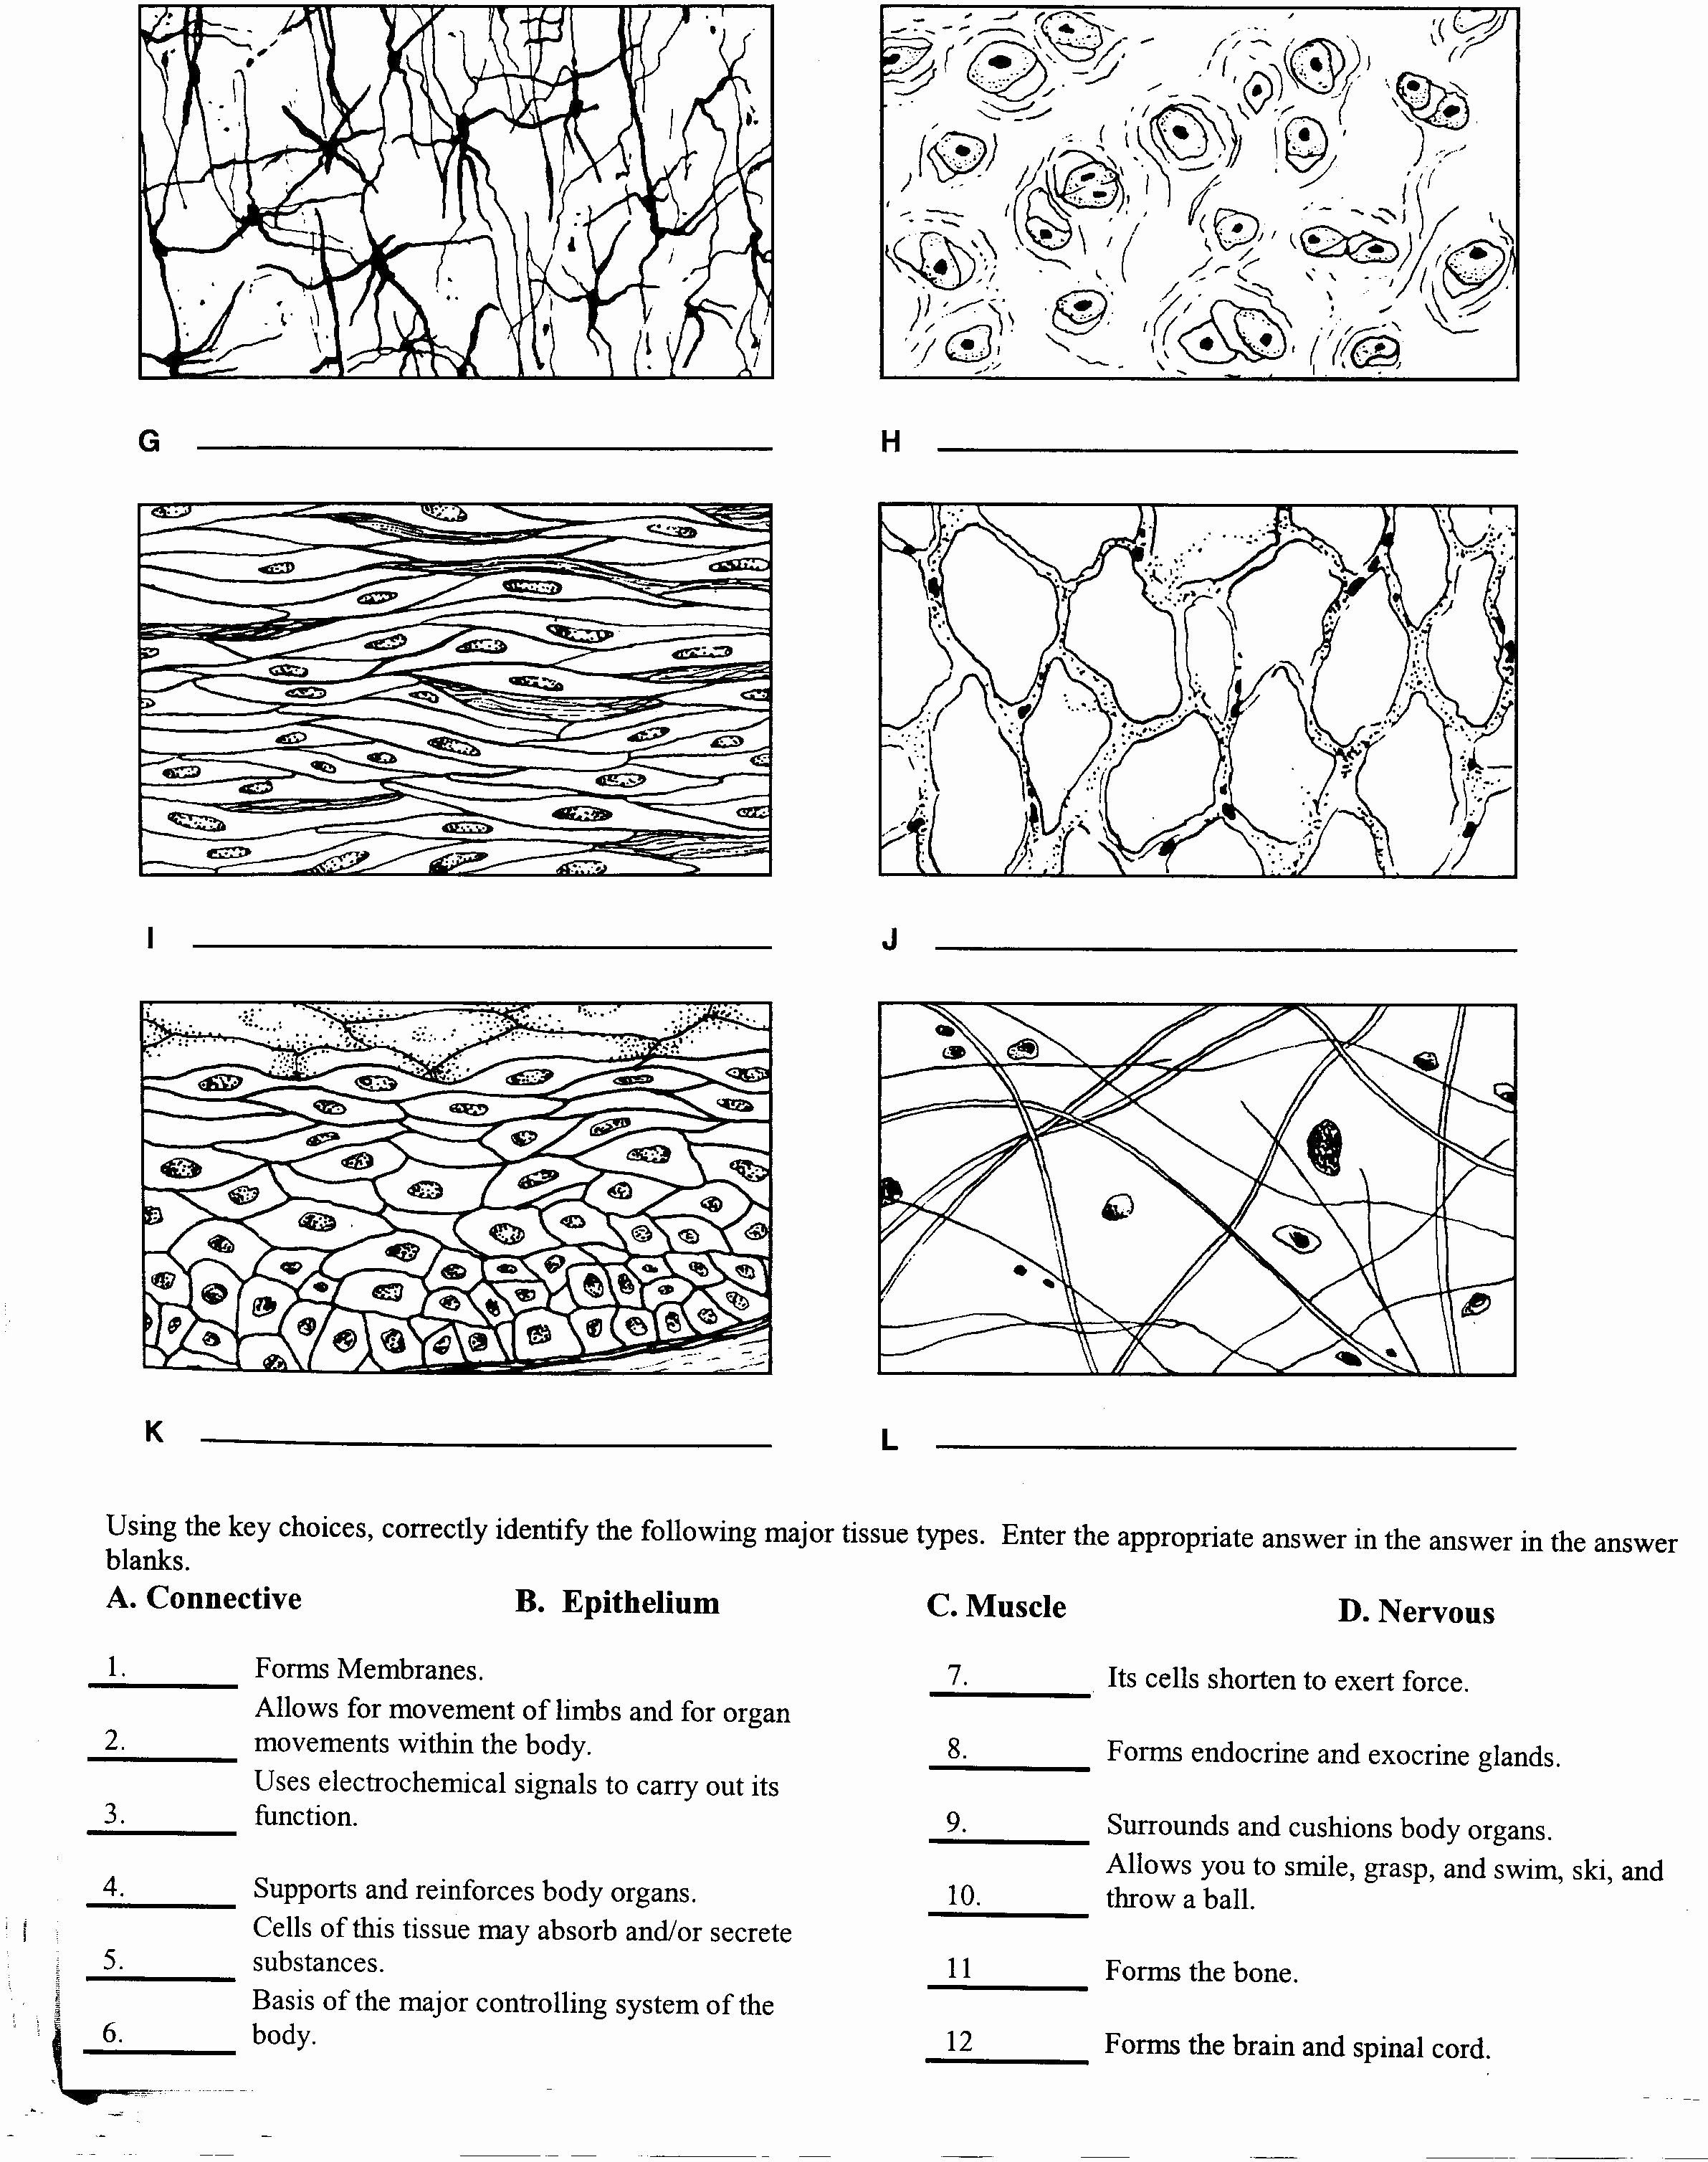 Types Of Tissues Worksheet Inspirational Tissue Worksheet W1 Cc Cycle 3 Weeks 1 6